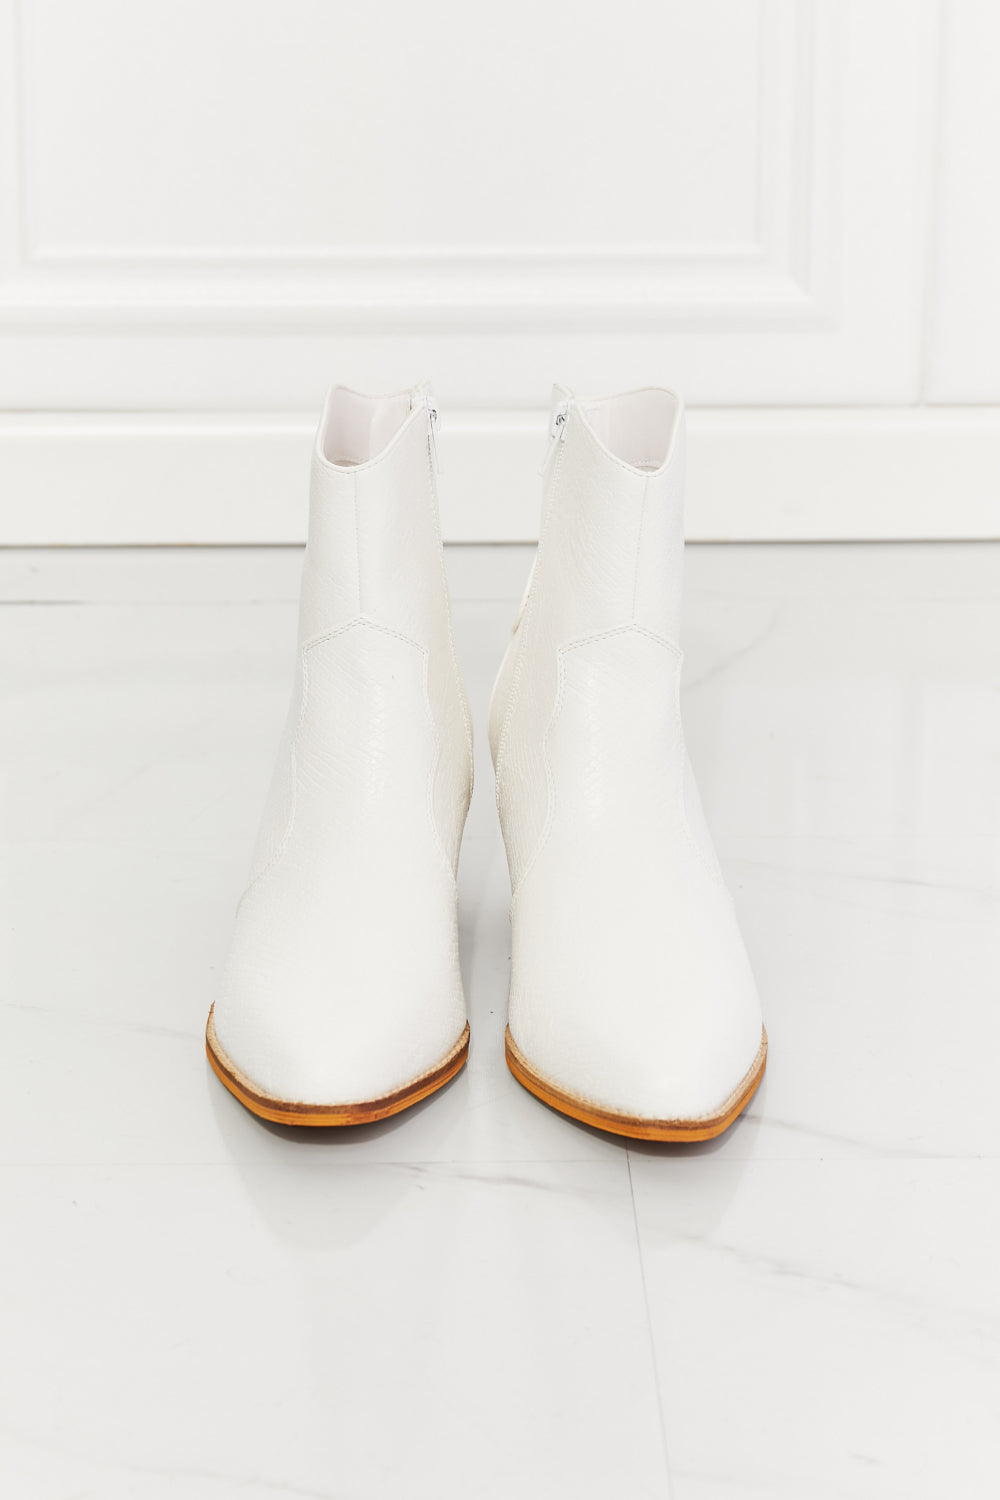 MMShoes Watertower Town Faux Leather Western Ankle Boots in White - Tigbul's Fashion